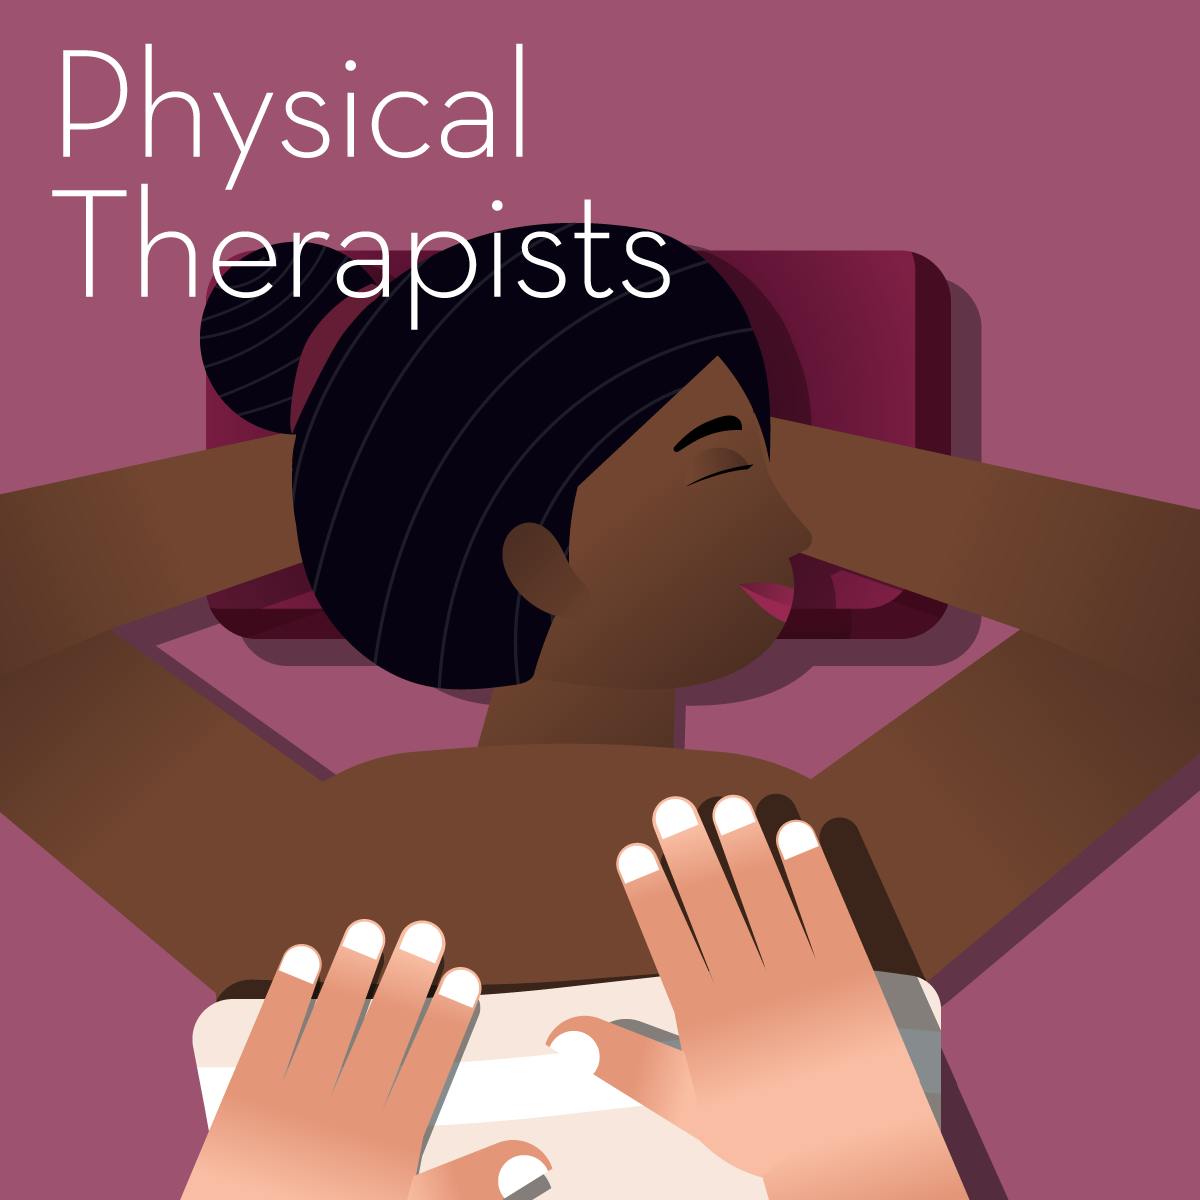 Illustration of a guide containing gifts for physical therapists. A woman is lying on a massage table wrapped in a towel, and a pair of hands are giving a massage.